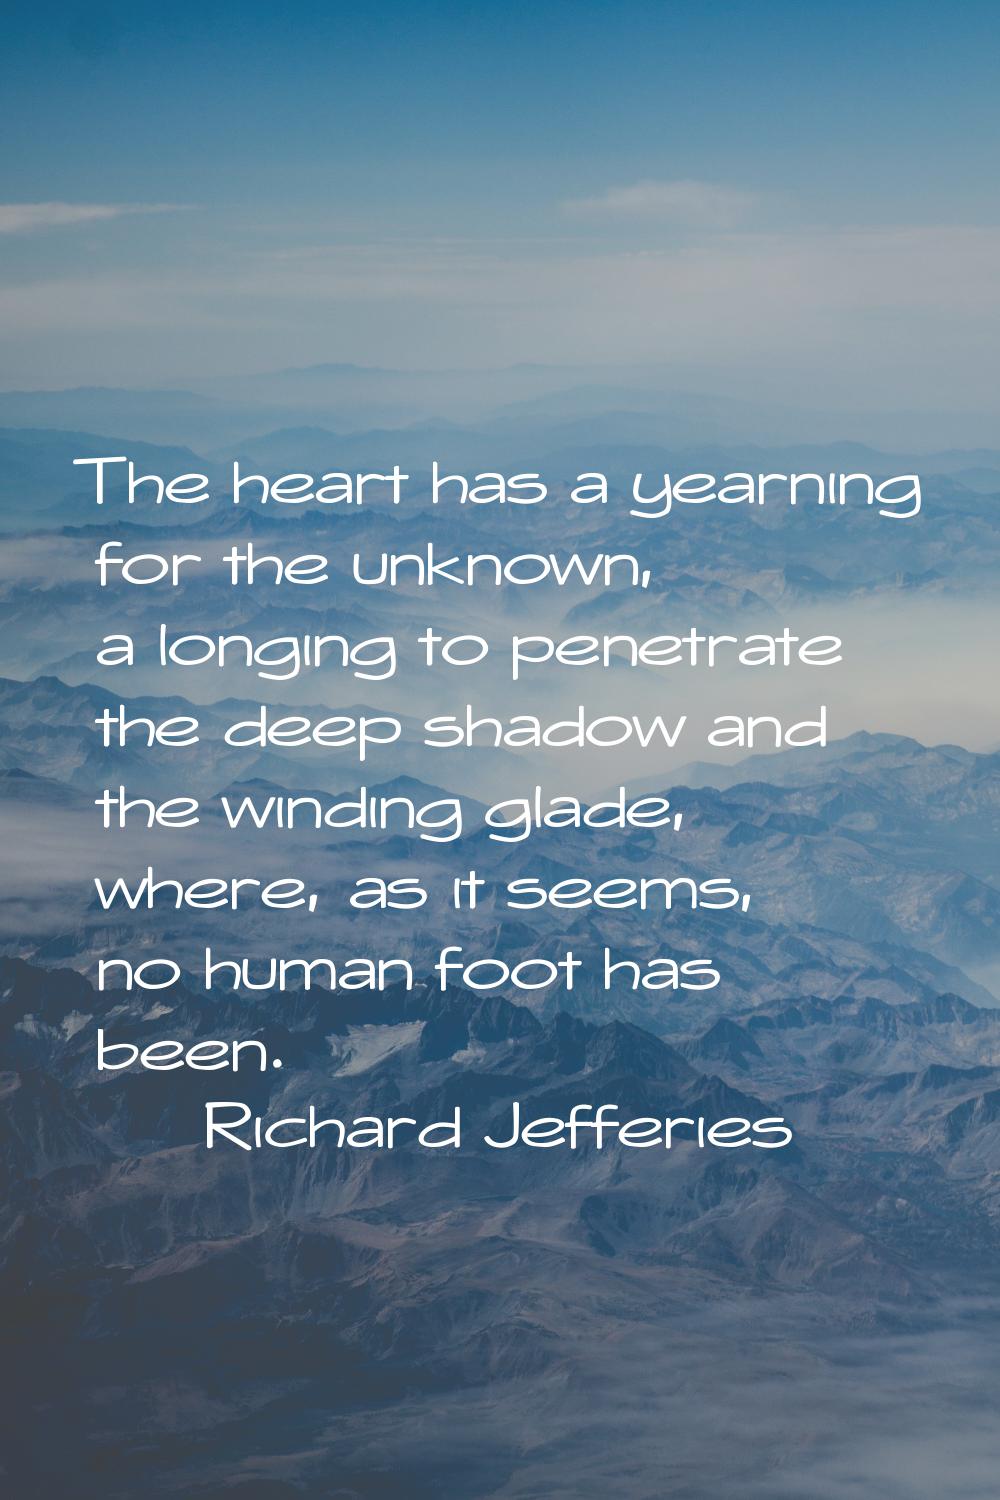 The heart has a yearning for the unknown, a longing to penetrate the deep shadow and the winding gl